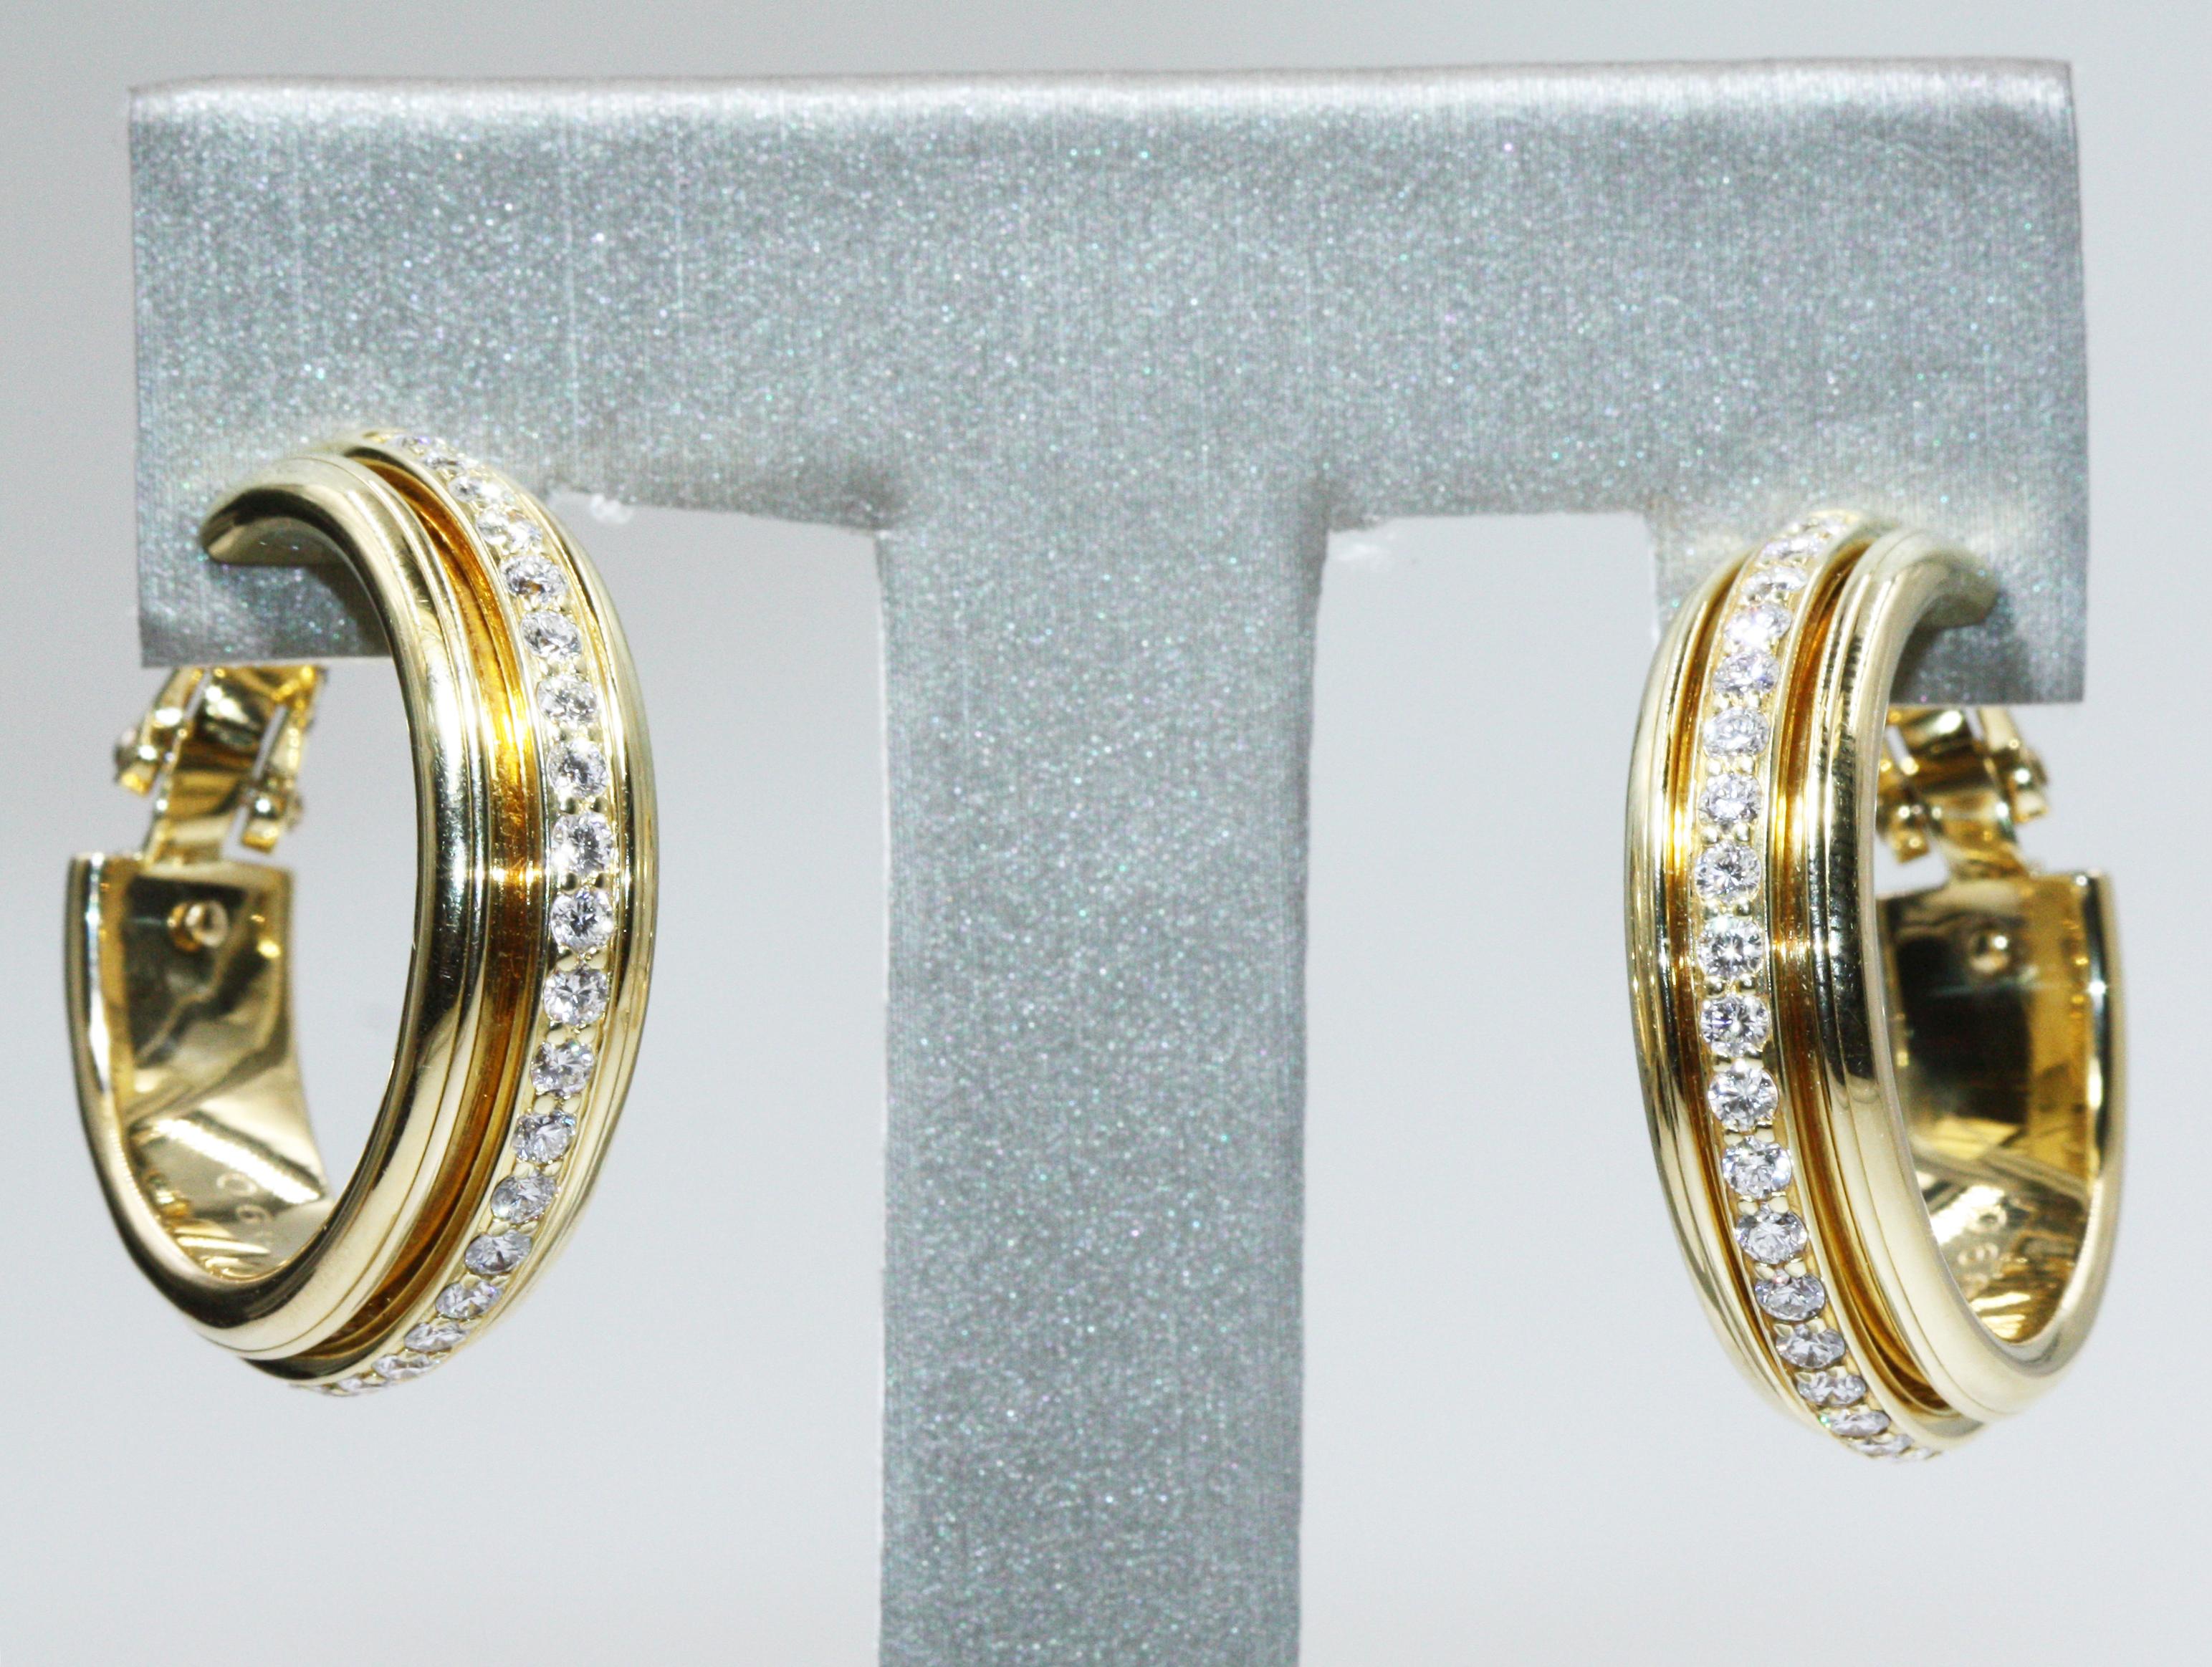 A pair of 18k yellow gold hoop earrings from the Possession collection by Piaget. Set with diamonds. he hoops have fluted boarders with a freely moving ring in the centre.
Weight: approximately 13.7g
Earring diameter: approximately 1.4cm
RE: